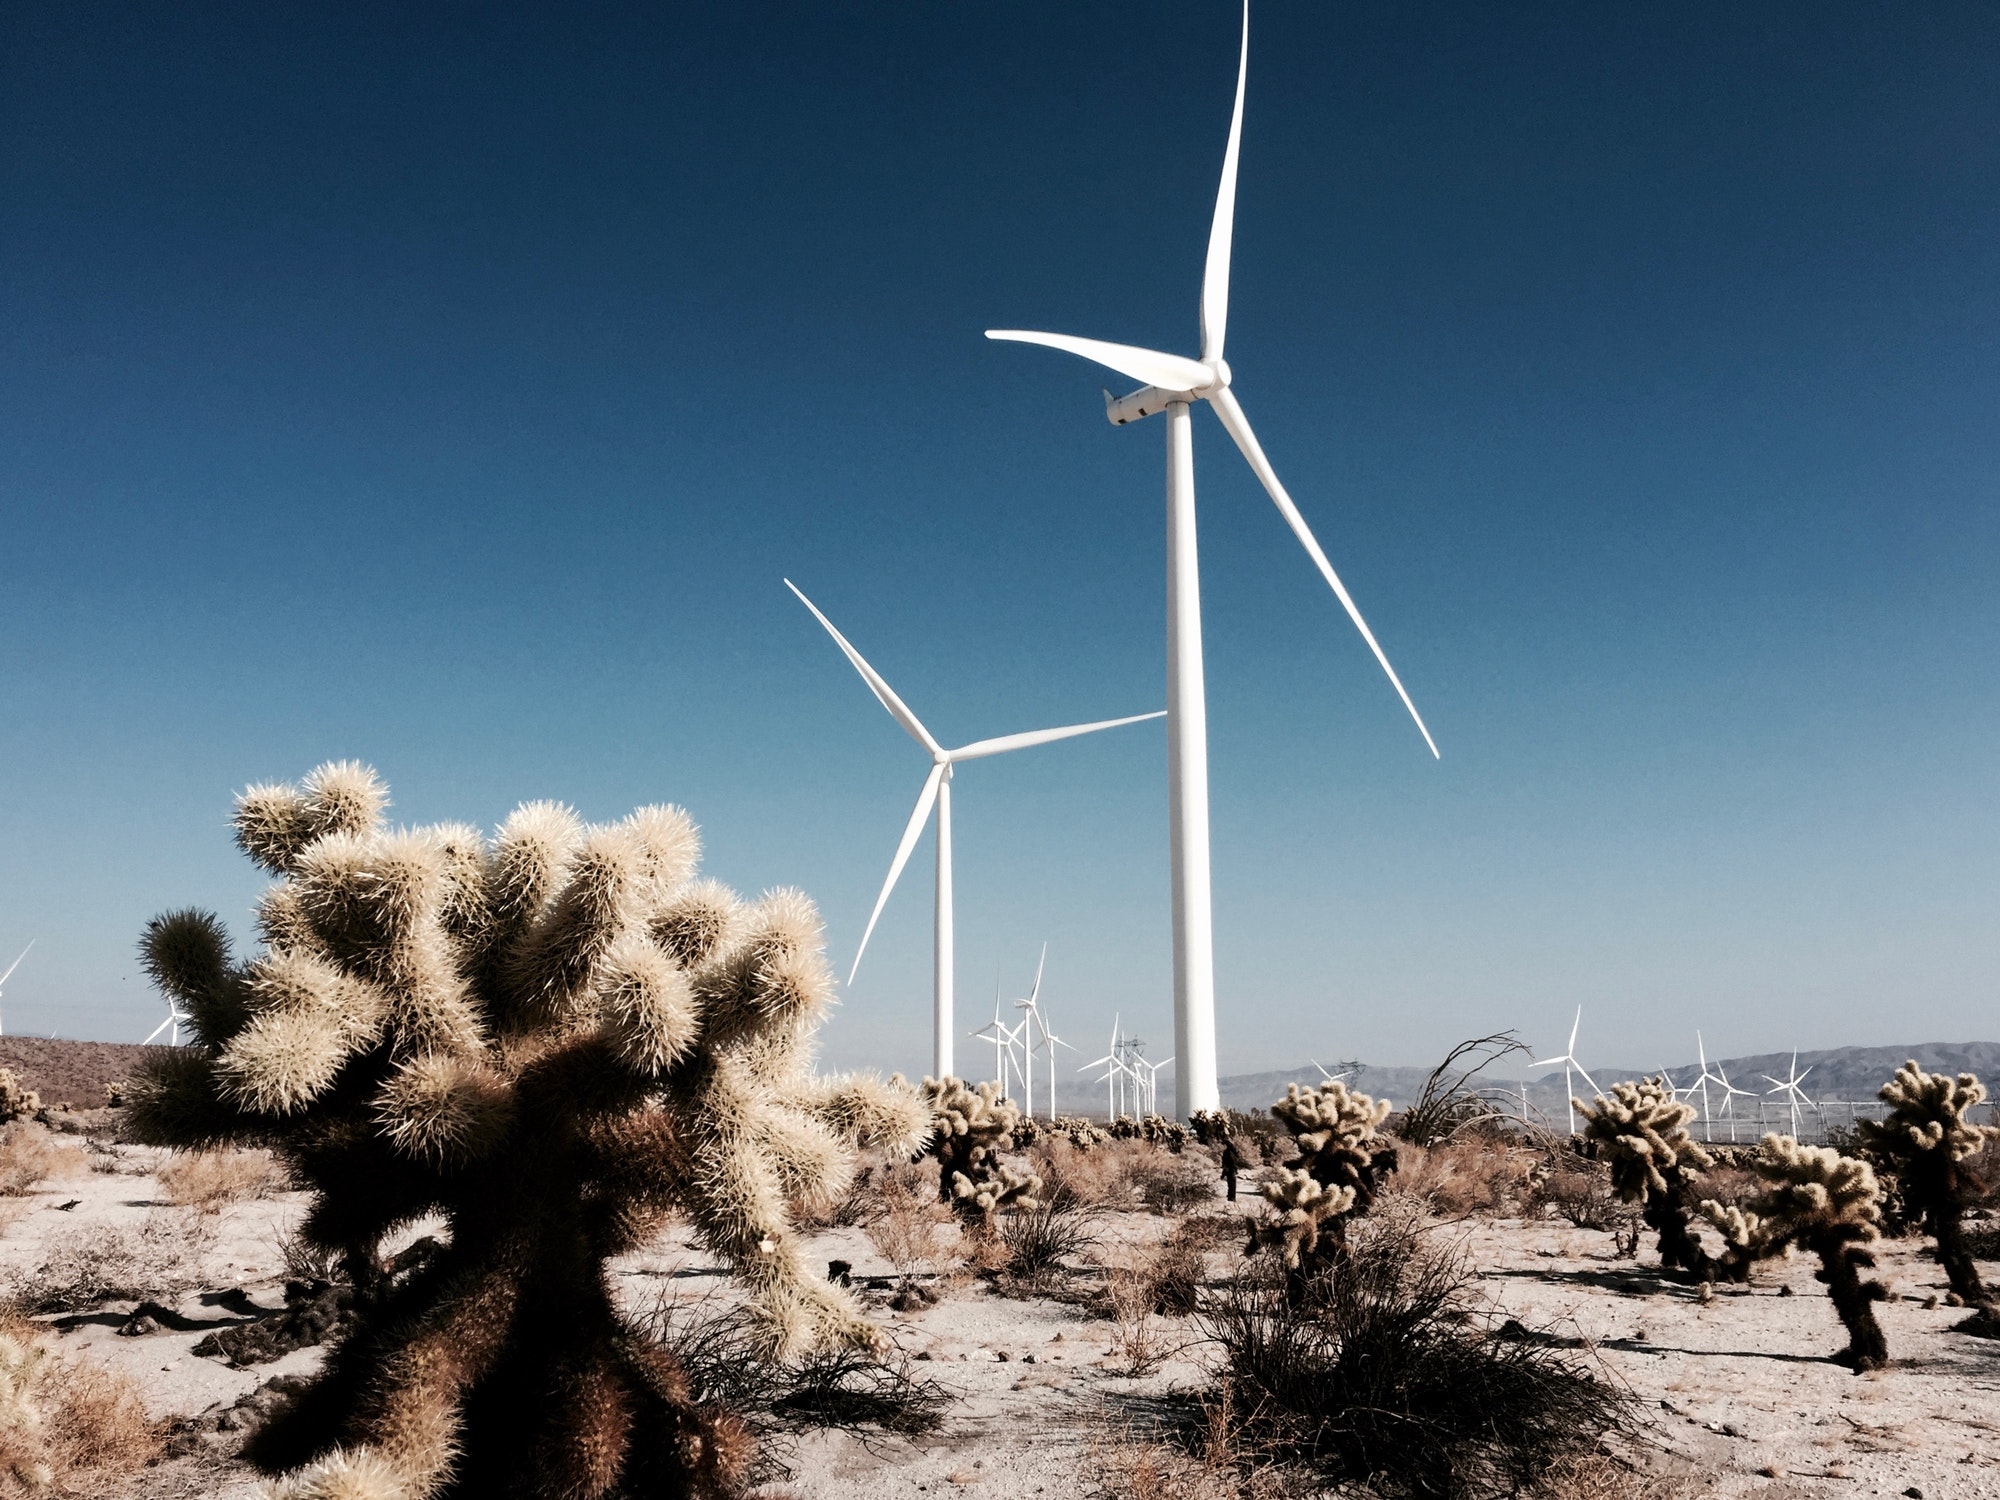 Clean wind energy at work in the California dessert.